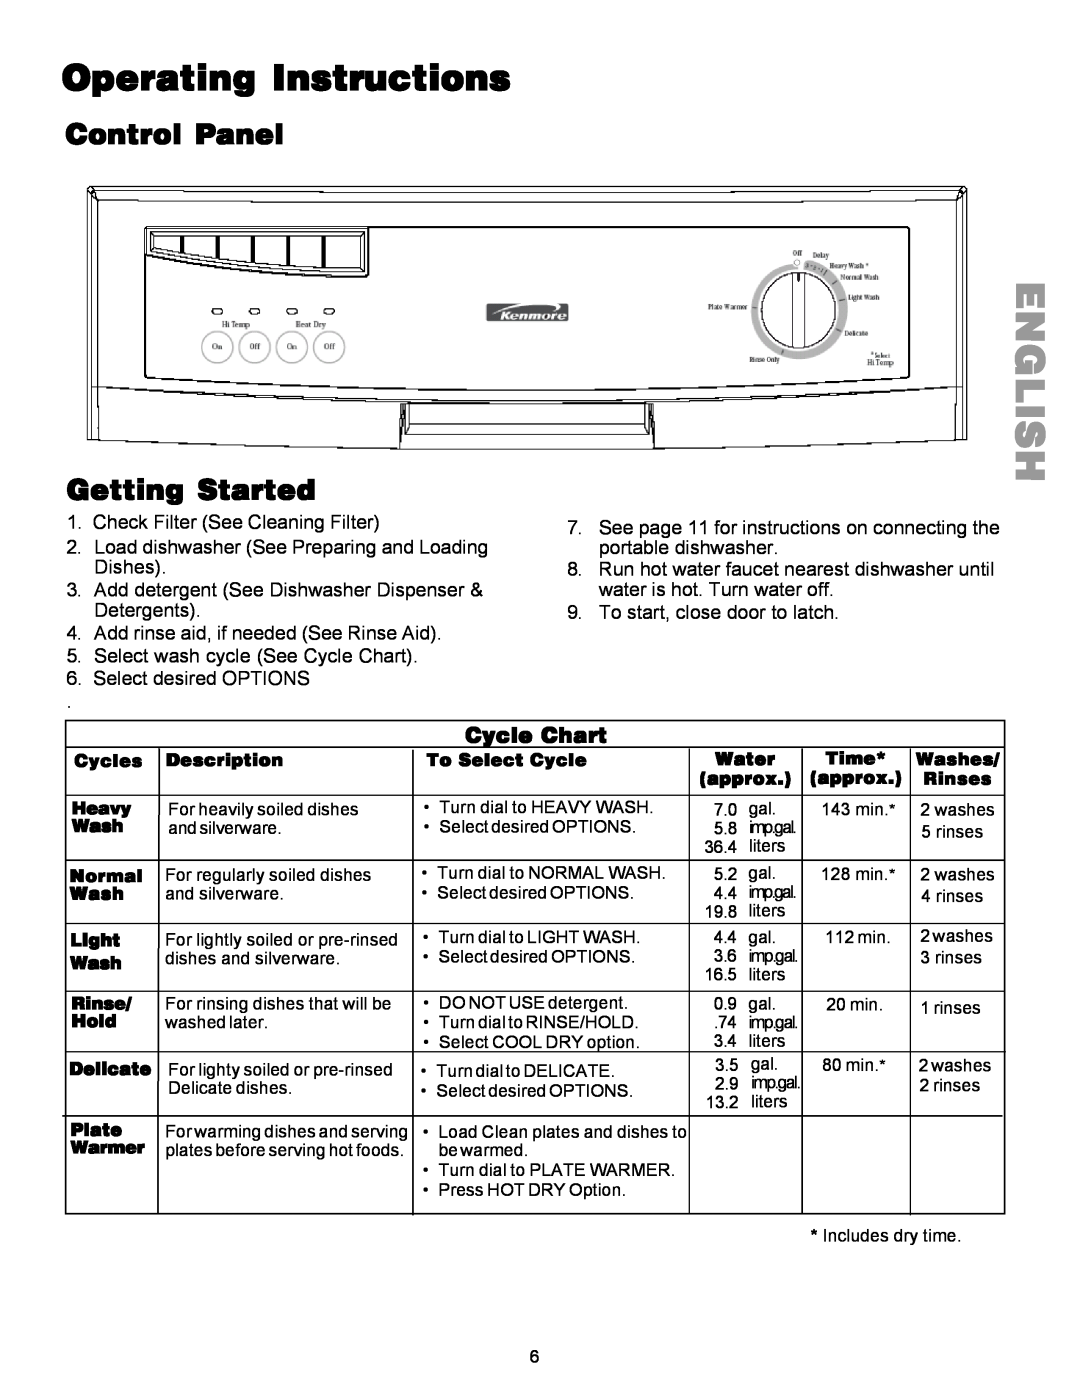 Kenmore 587.1441 manual Operating Instructions, Control Panel, Getting Started, English, Cycle Chart 